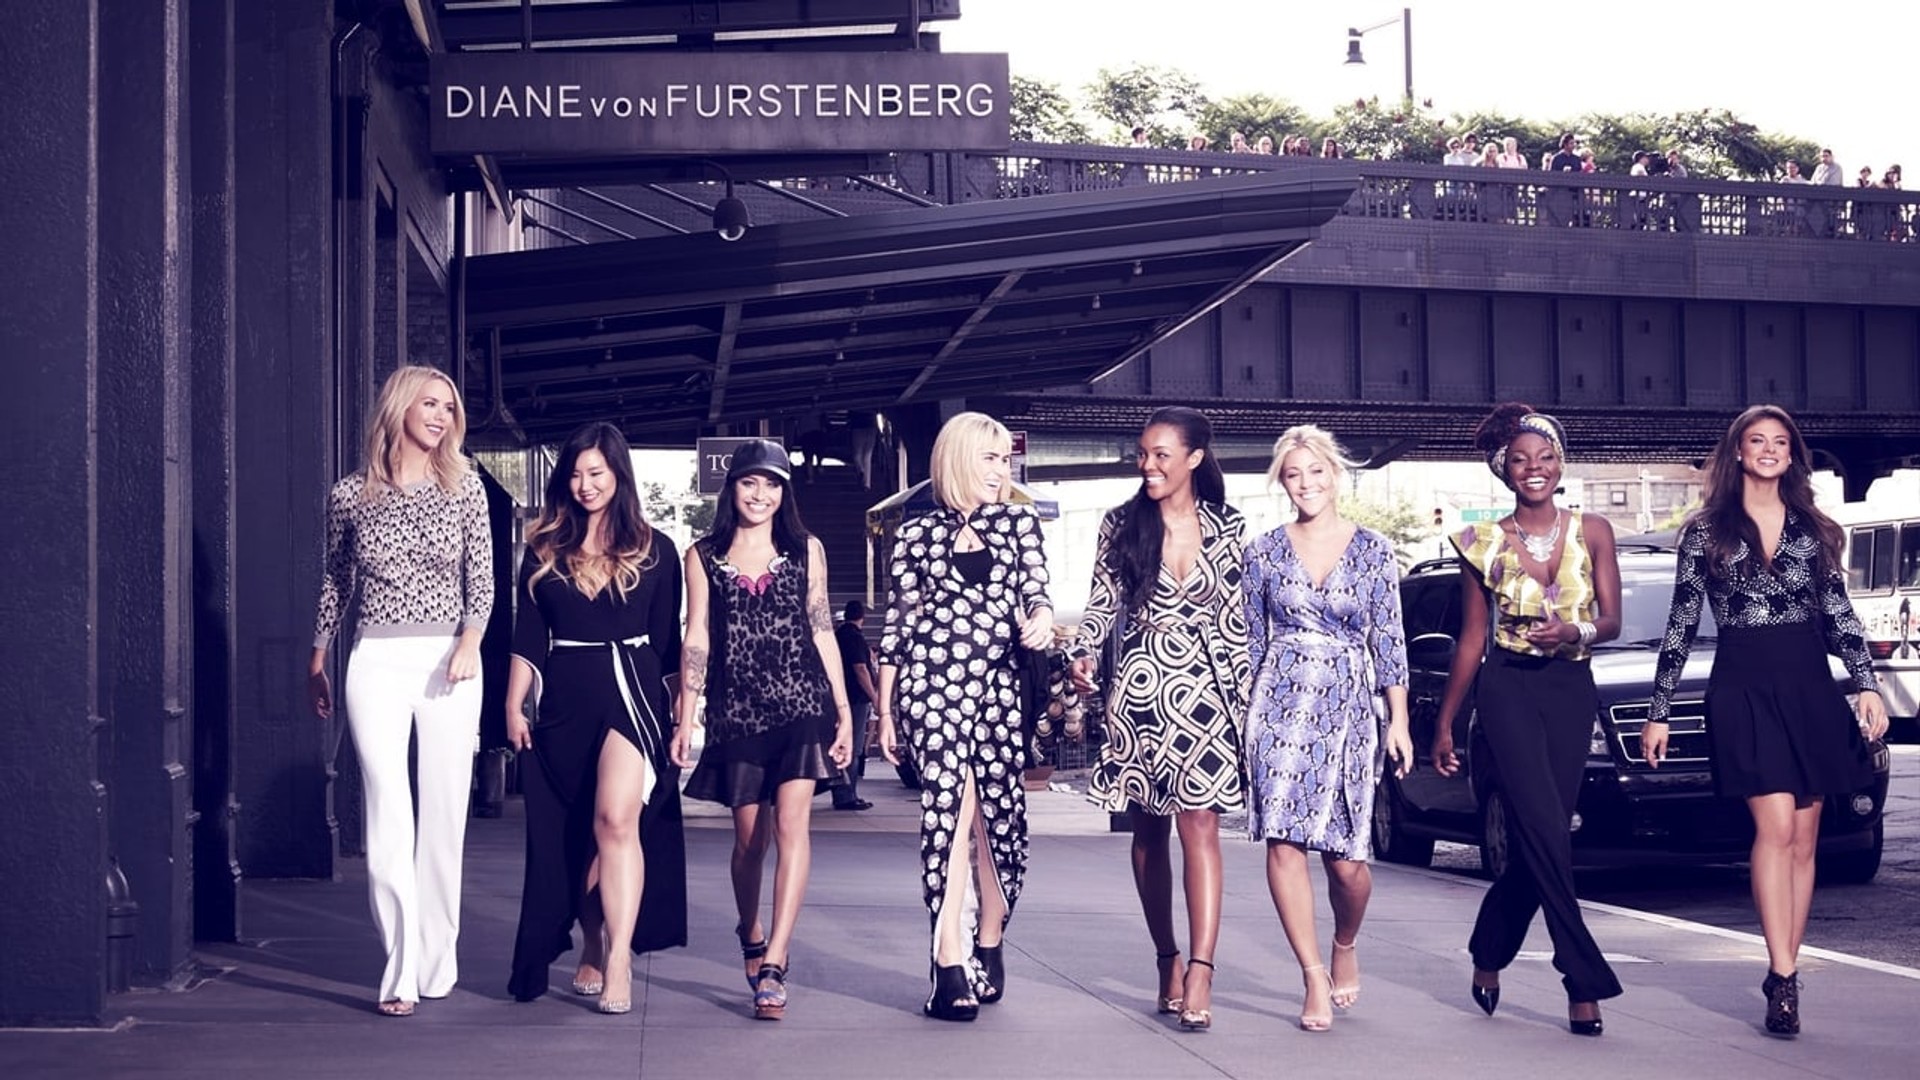 House of DVF background